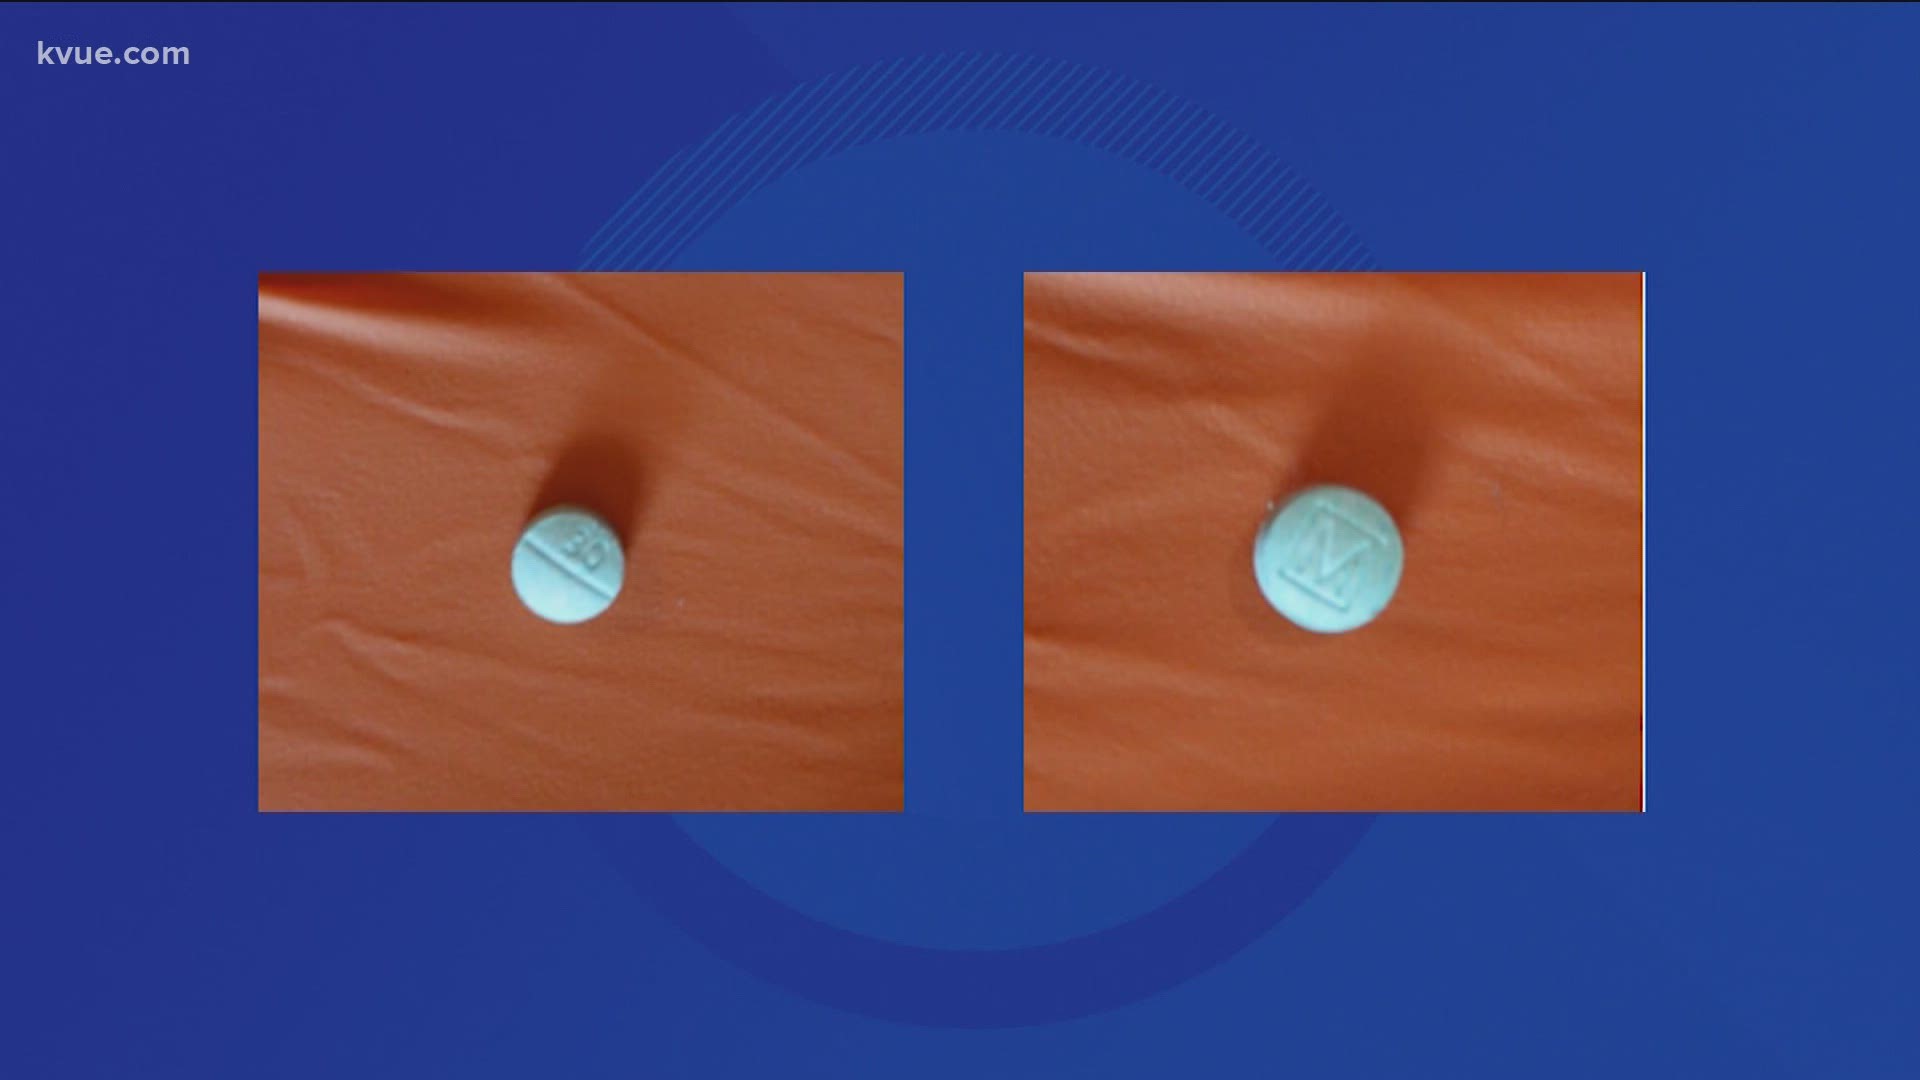 Detectives believe counterfeit oxycodone pills may be laced with fentanyl.